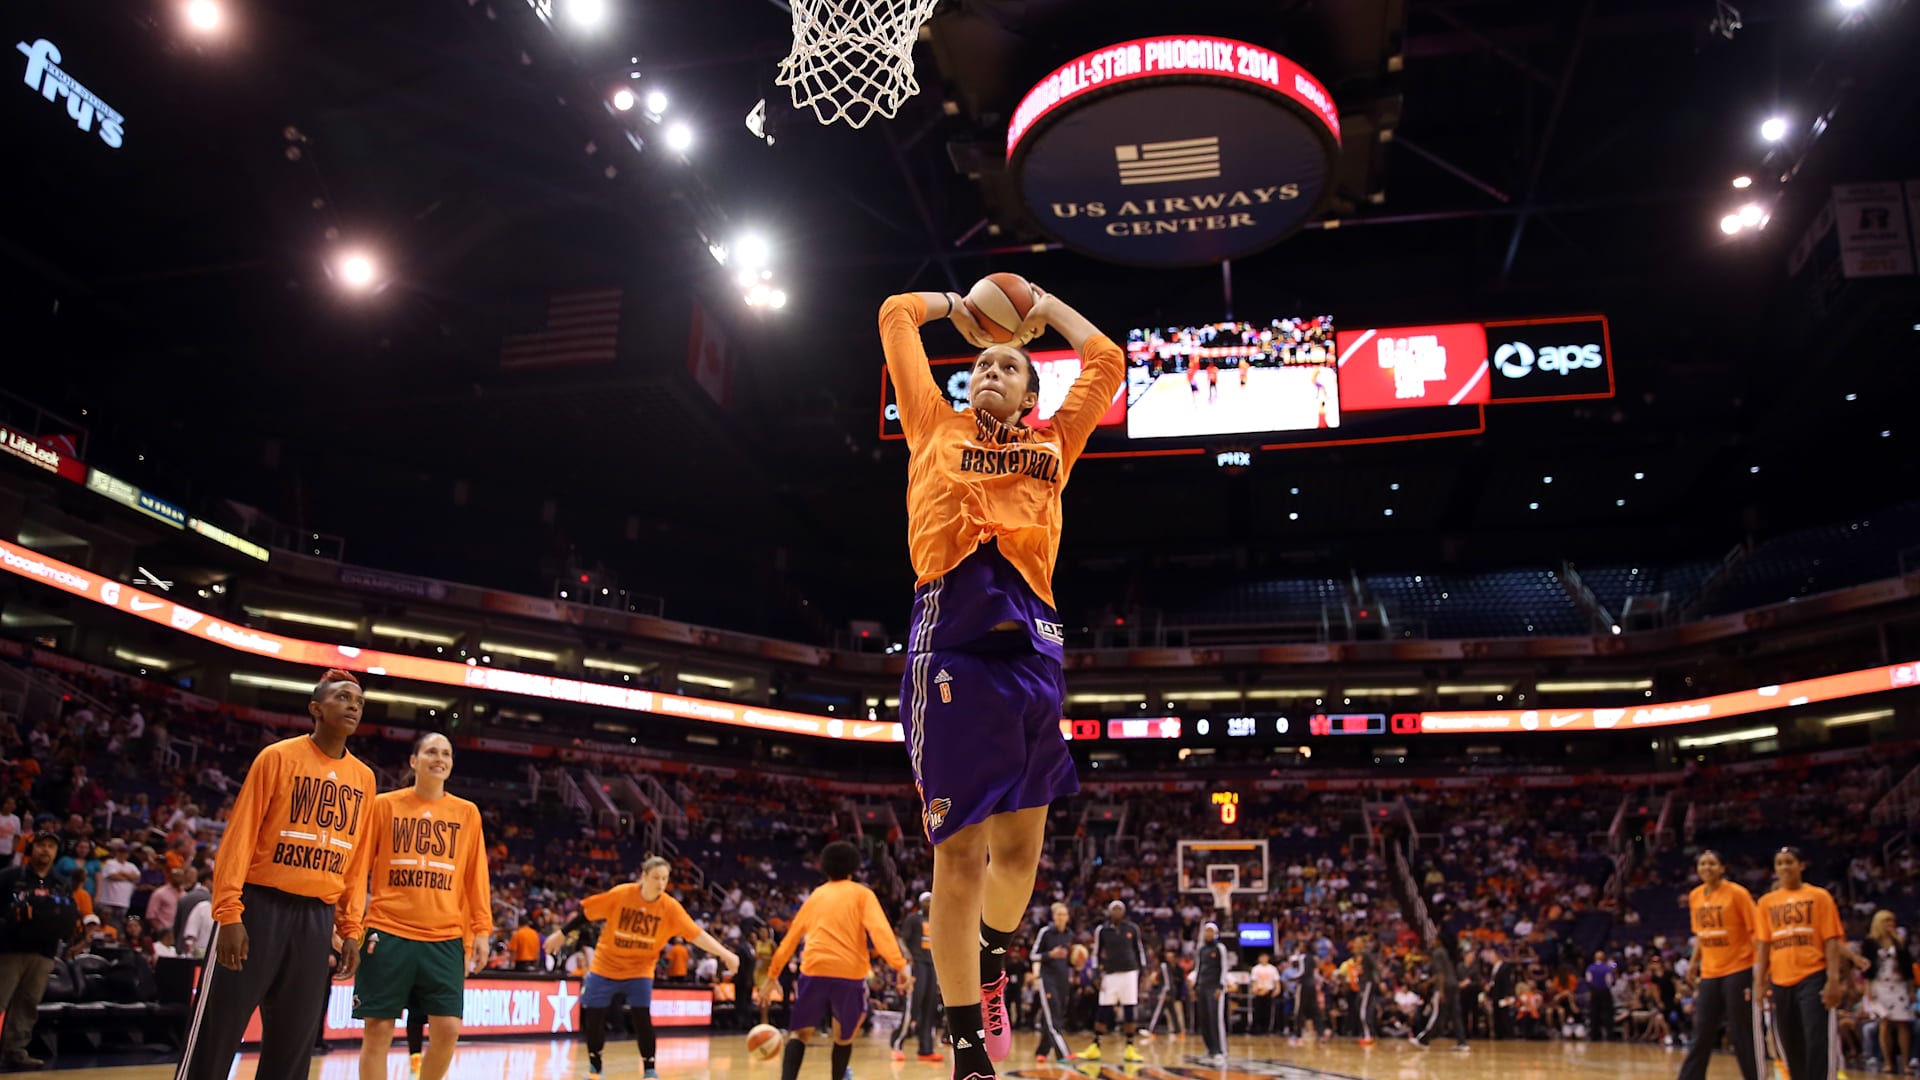 Wnba Playoffs Queen Of Dunking Brittney Griner And Phoenix Mercury Set For Clash With Las Vegas Aces